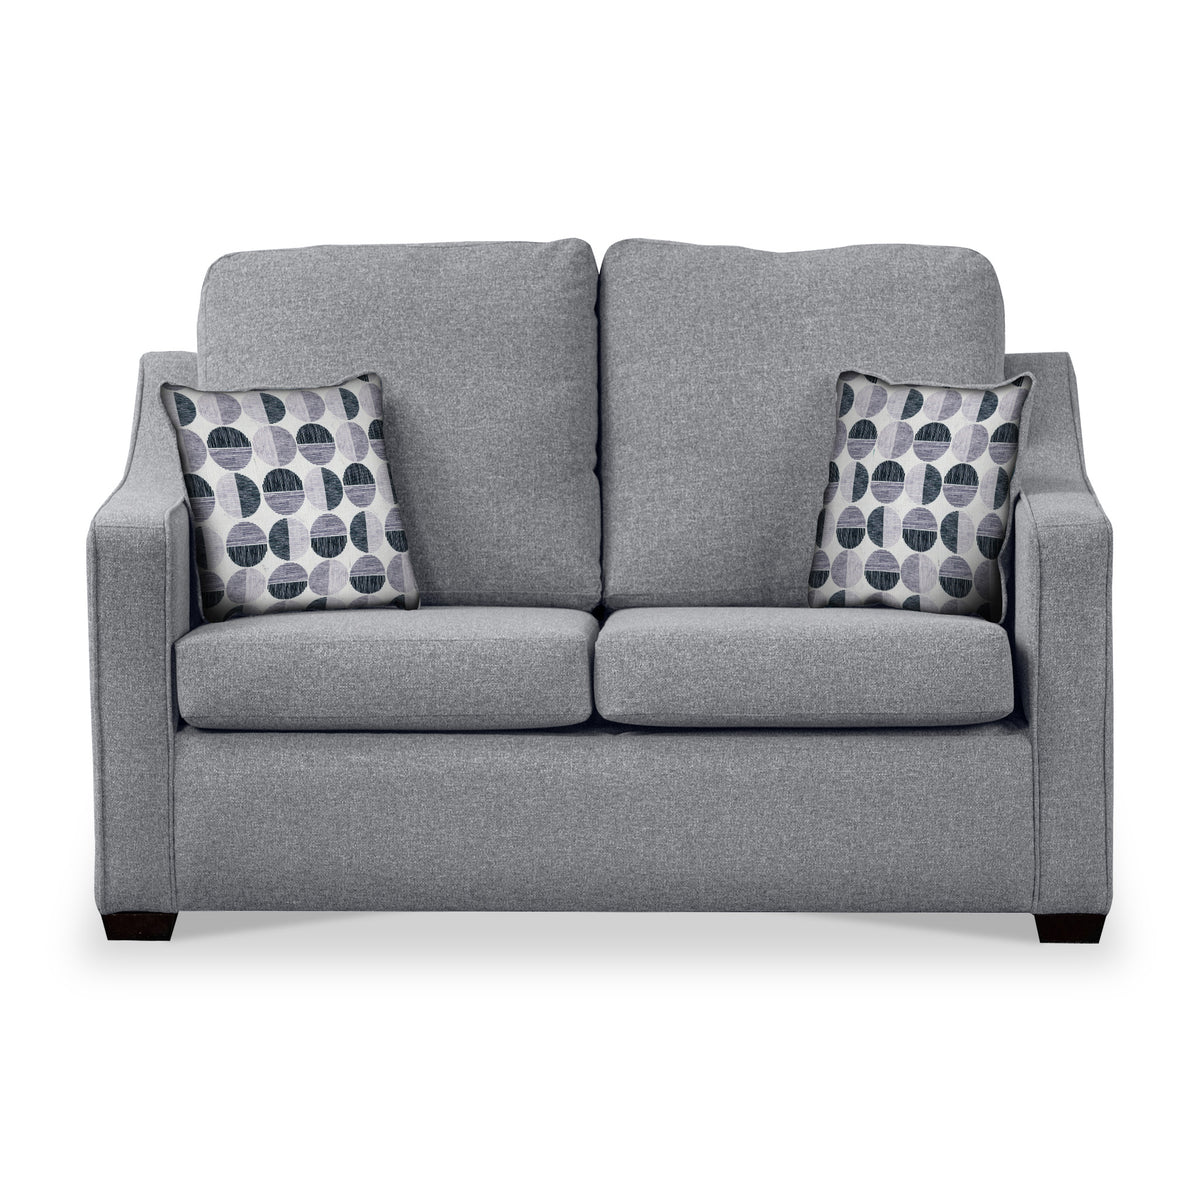 Charlcote Silver Faux Linen 2 Seater Sofabed with Mono Scatter Cushions from Roseland Furniture